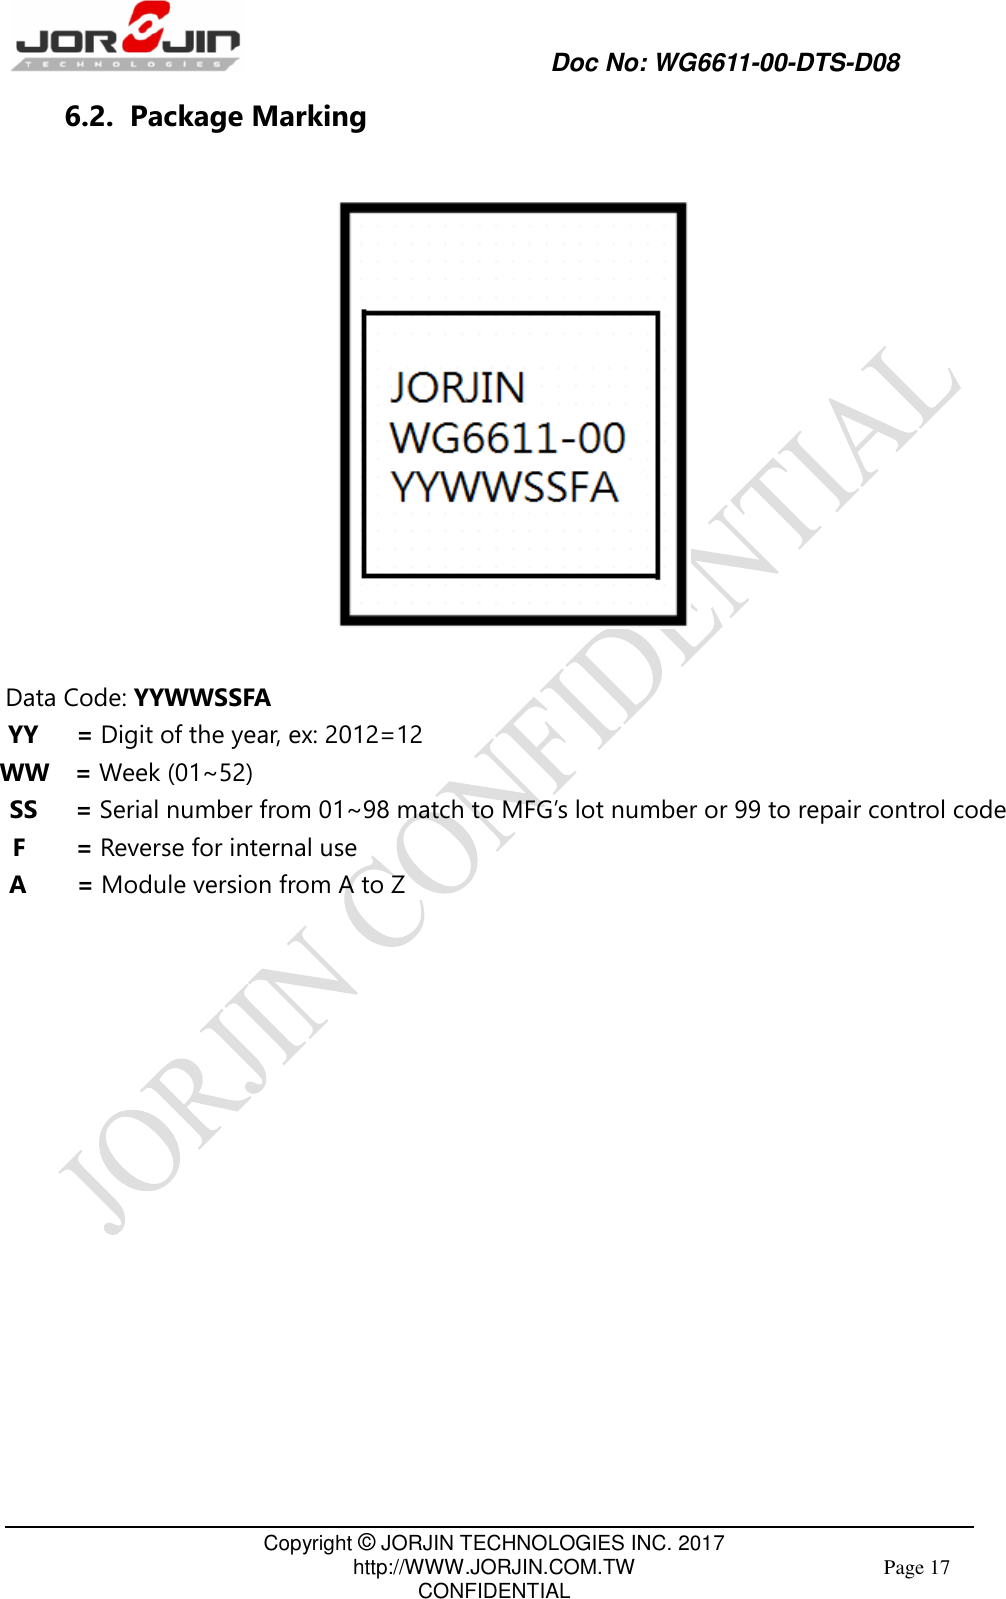             Doc No: WG6611-00-DTS-D08                                                                                               Copyright © JORJIN TECHNOLOGIES INC. 2017 http://WWW.JORJIN.COM.TW CONFIDENTIAL Page 17 6.2.  Package Marking    Data Code: YYWWSSFA YY   = Digit of the year, ex: 2012=12 WW  = Week (01~52) SS   = Serial number from 01~98 match to MFG’s lot number or 99 to repair control code F    = Reverse for internal use A    = Module version from A to Z                 